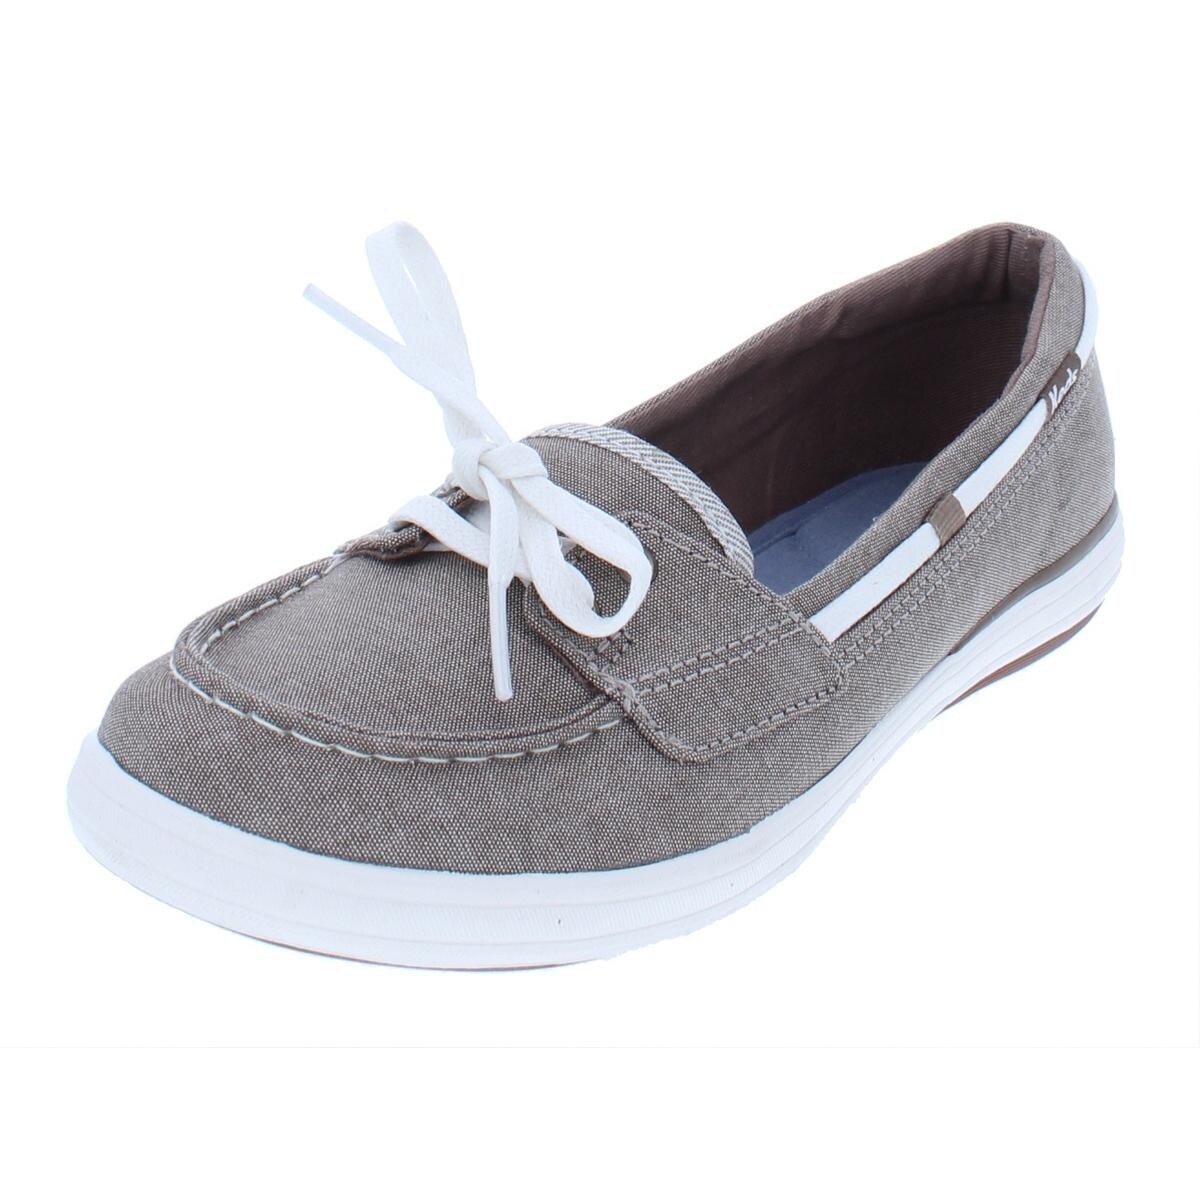 Keds Womens Glimmer Boat Shoes 